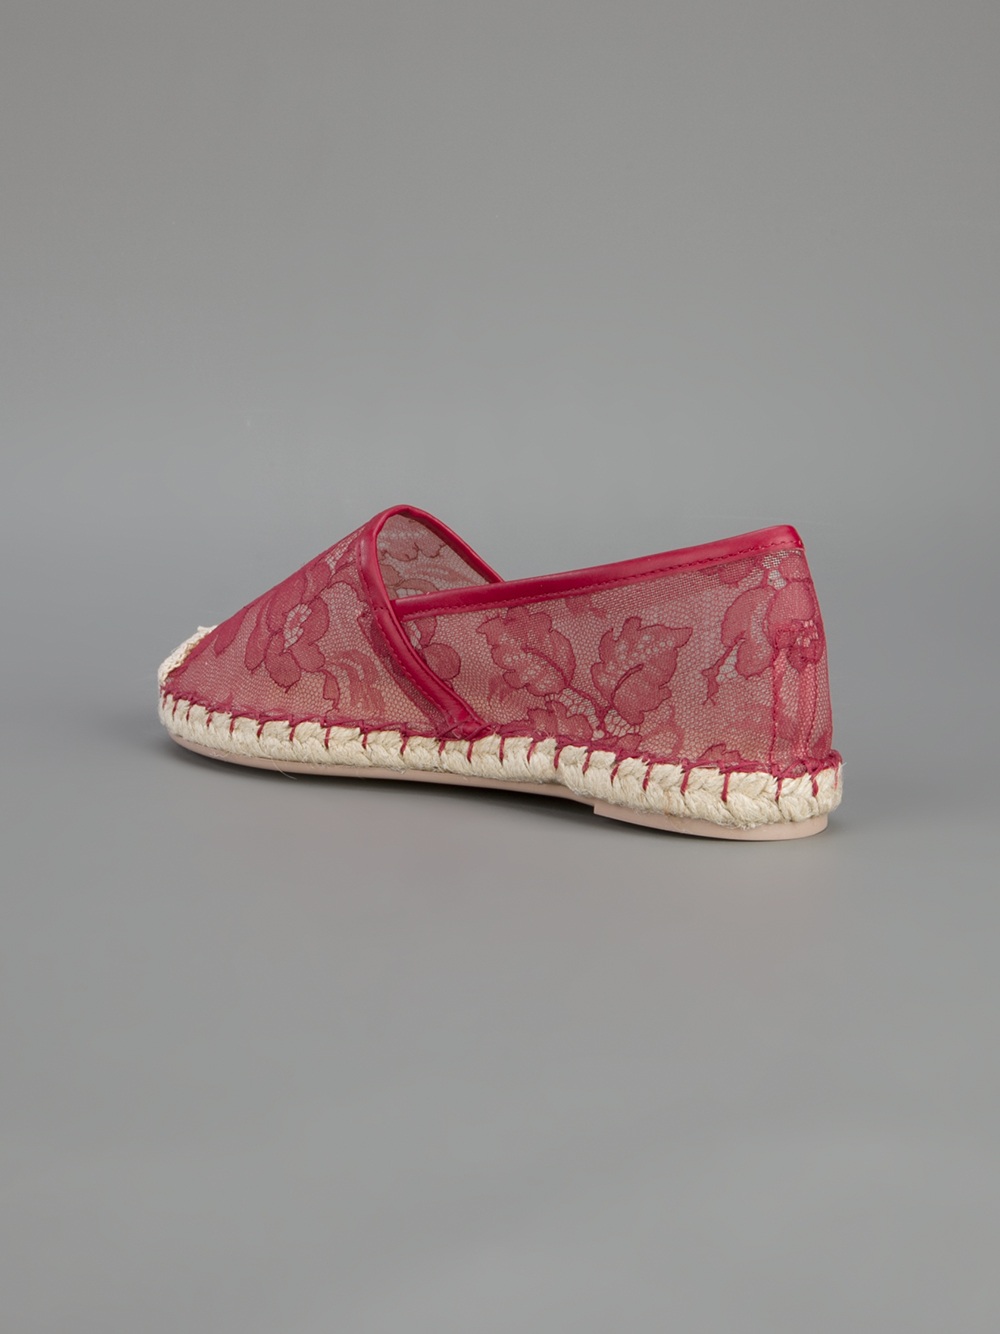 Lyst - Valentino Lace Mesh Espadrille in Pink